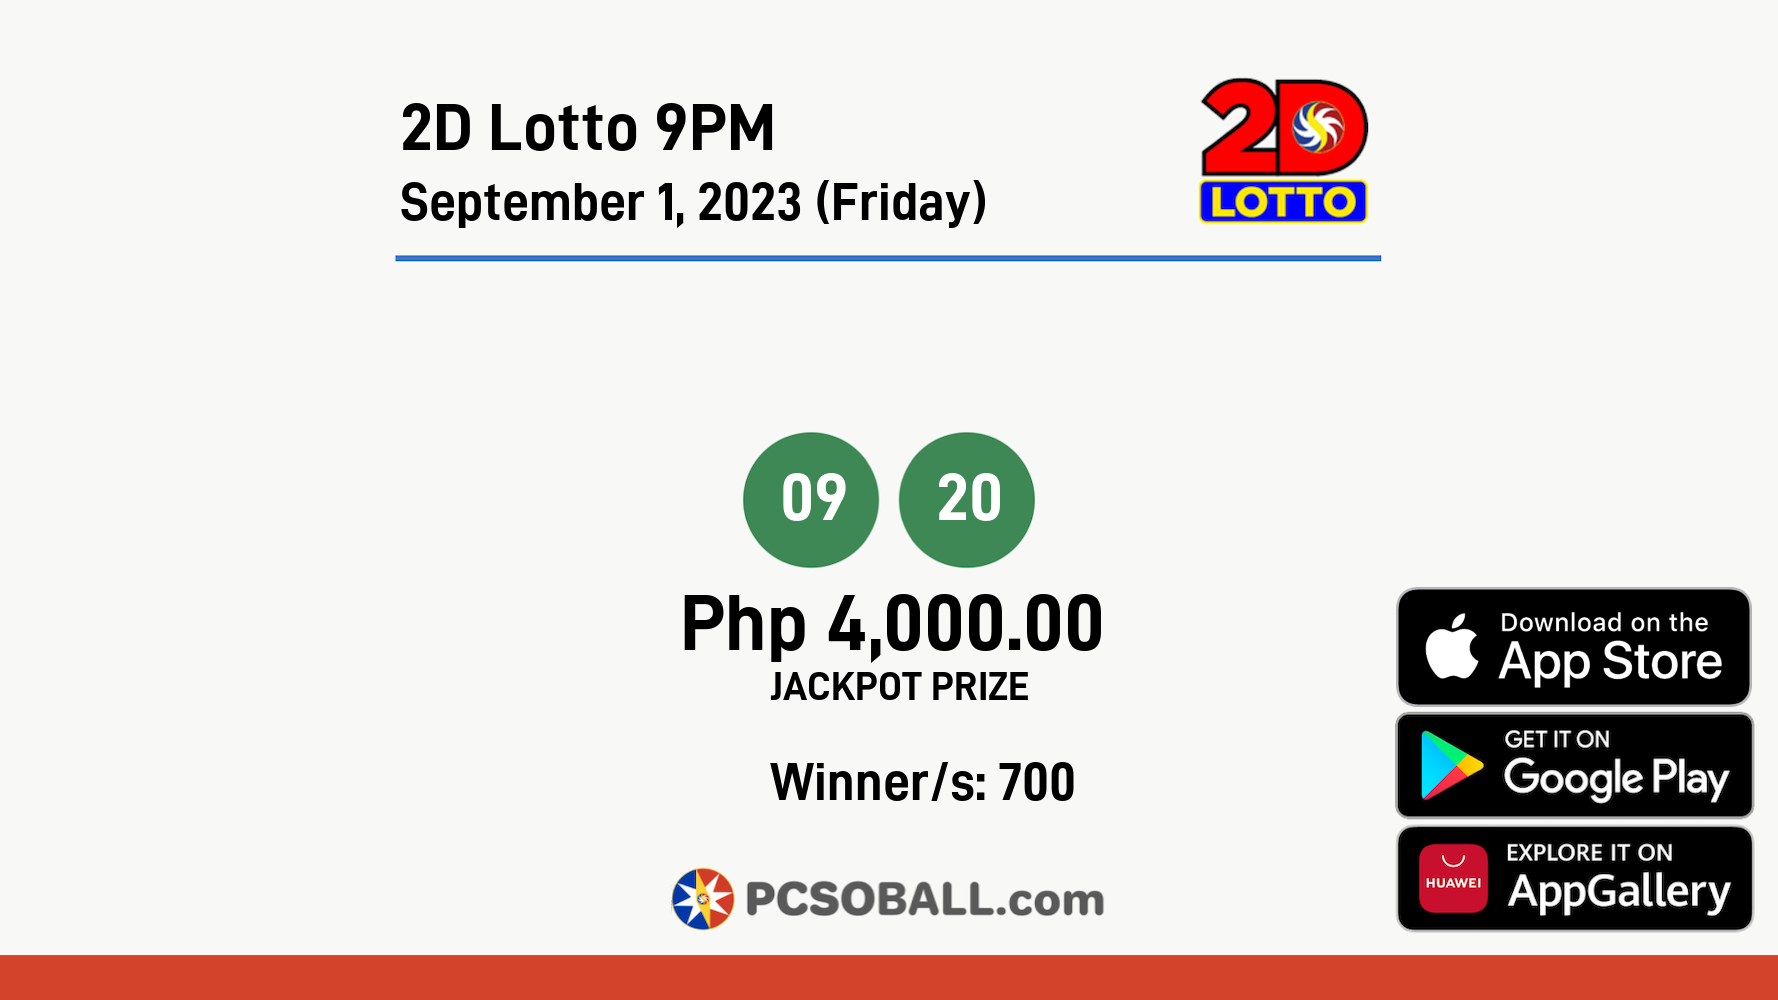 2D Lotto 9PM September 1, 2023 (Friday) Result